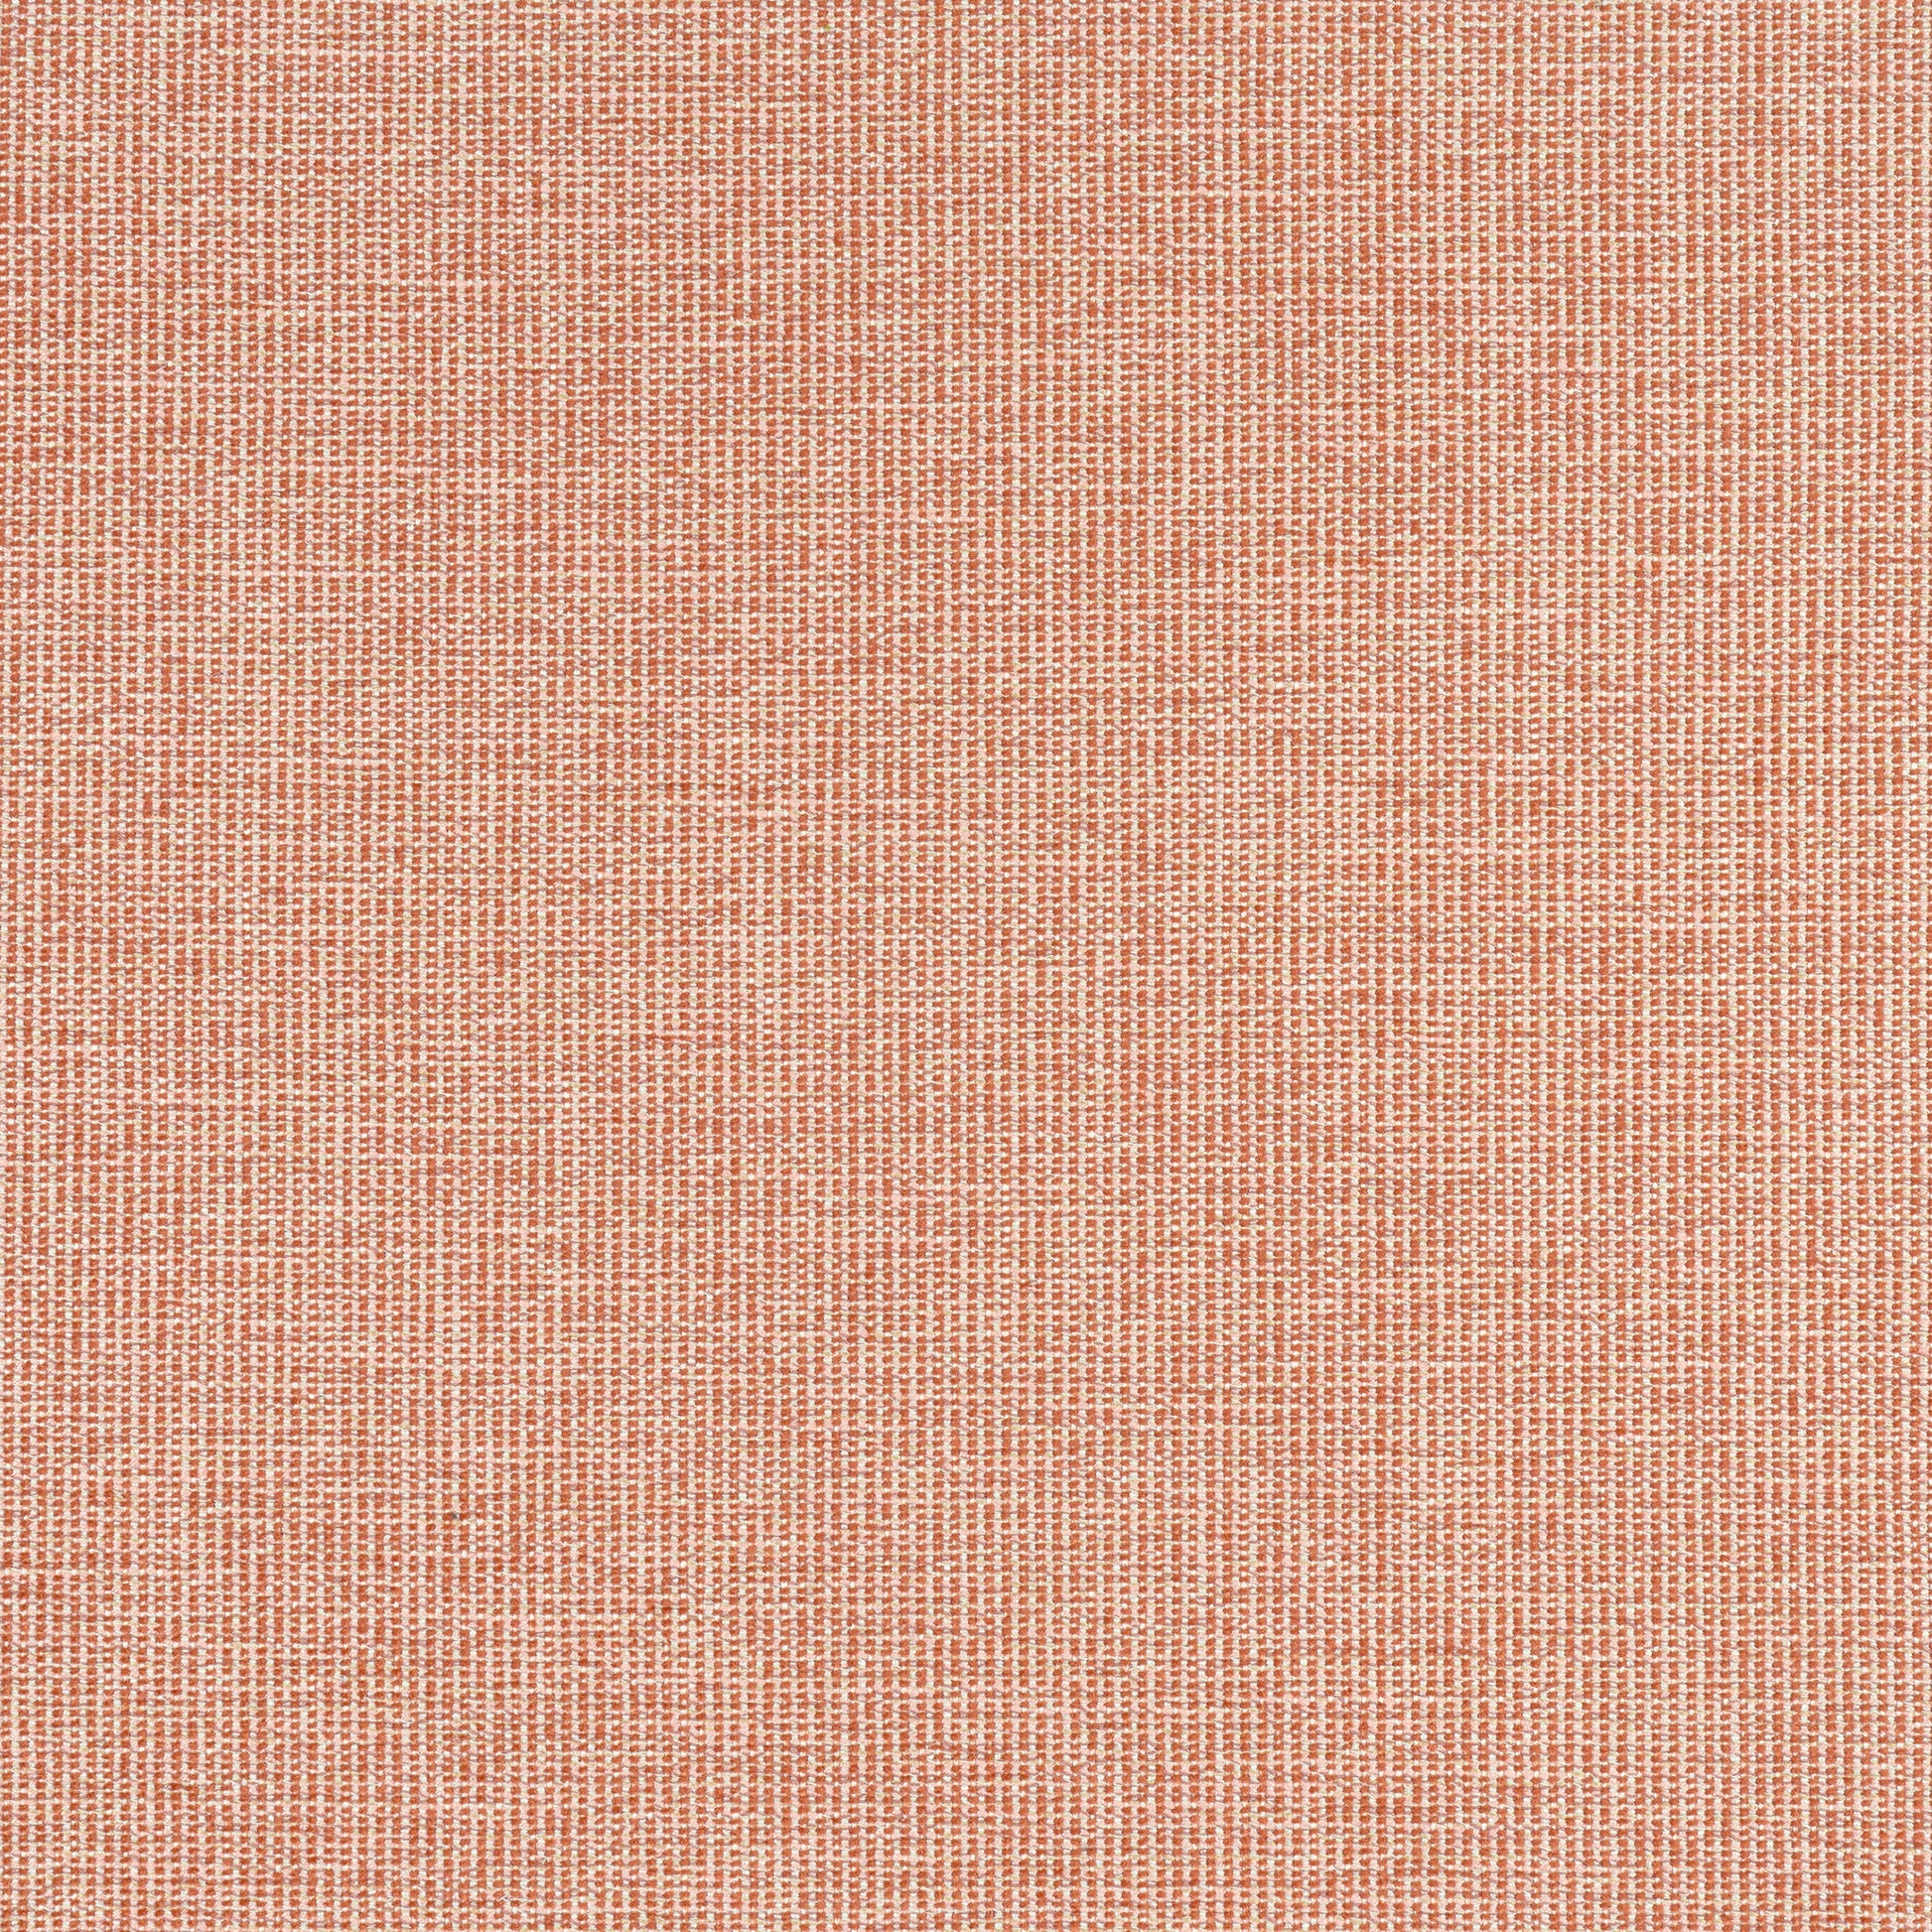 Purchase Thibaut Fabric Product W8761 pattern name Sacchi color Terracotta